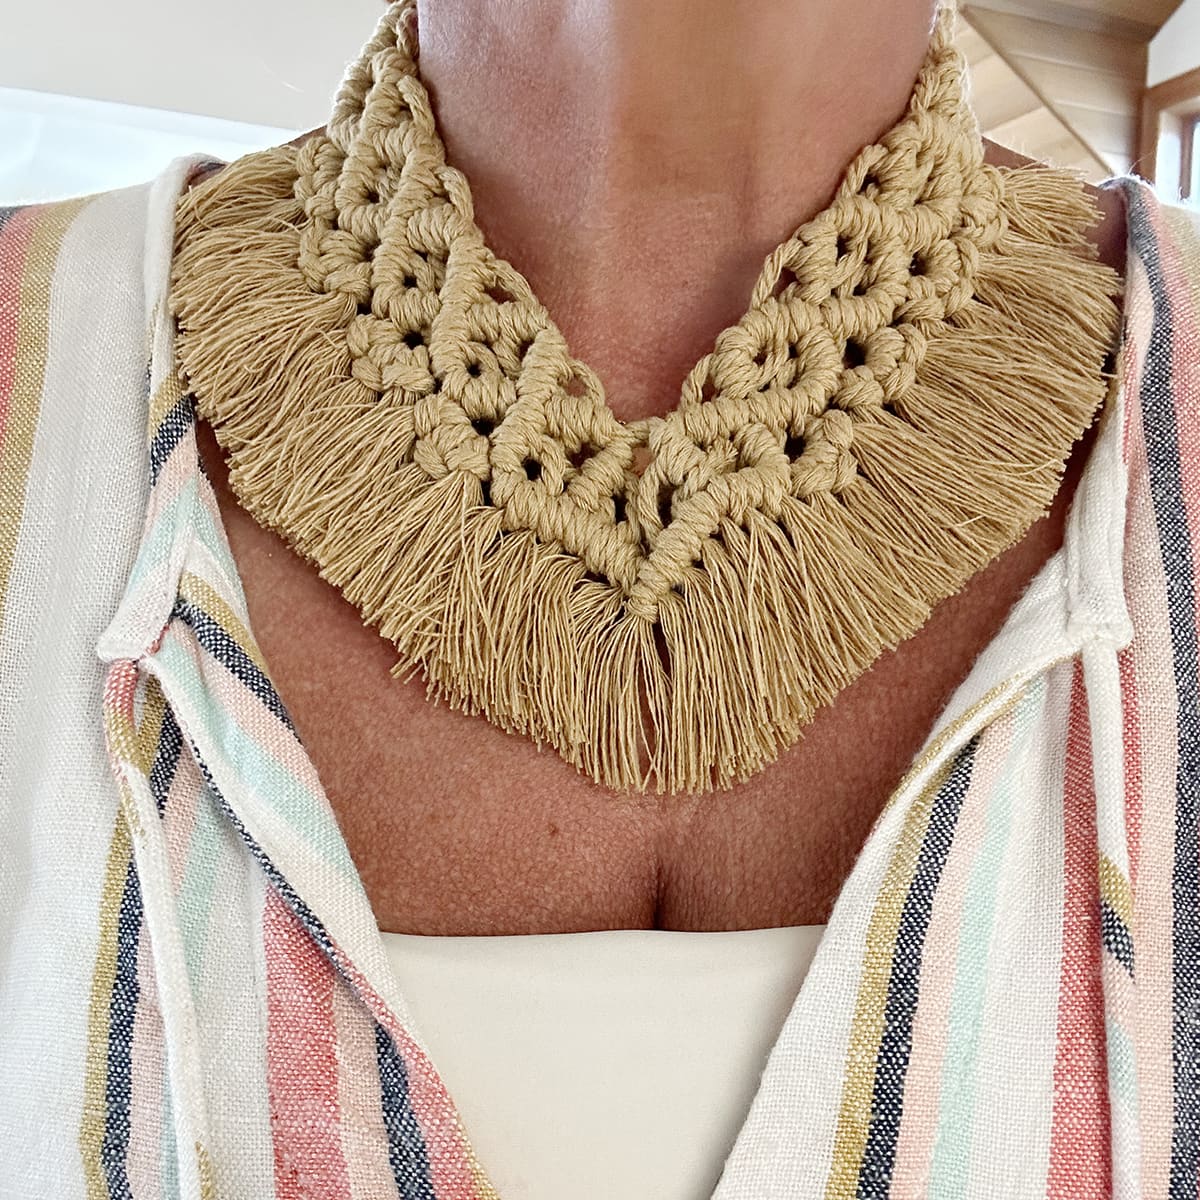 How to make a macrame necklace (3 different ways)